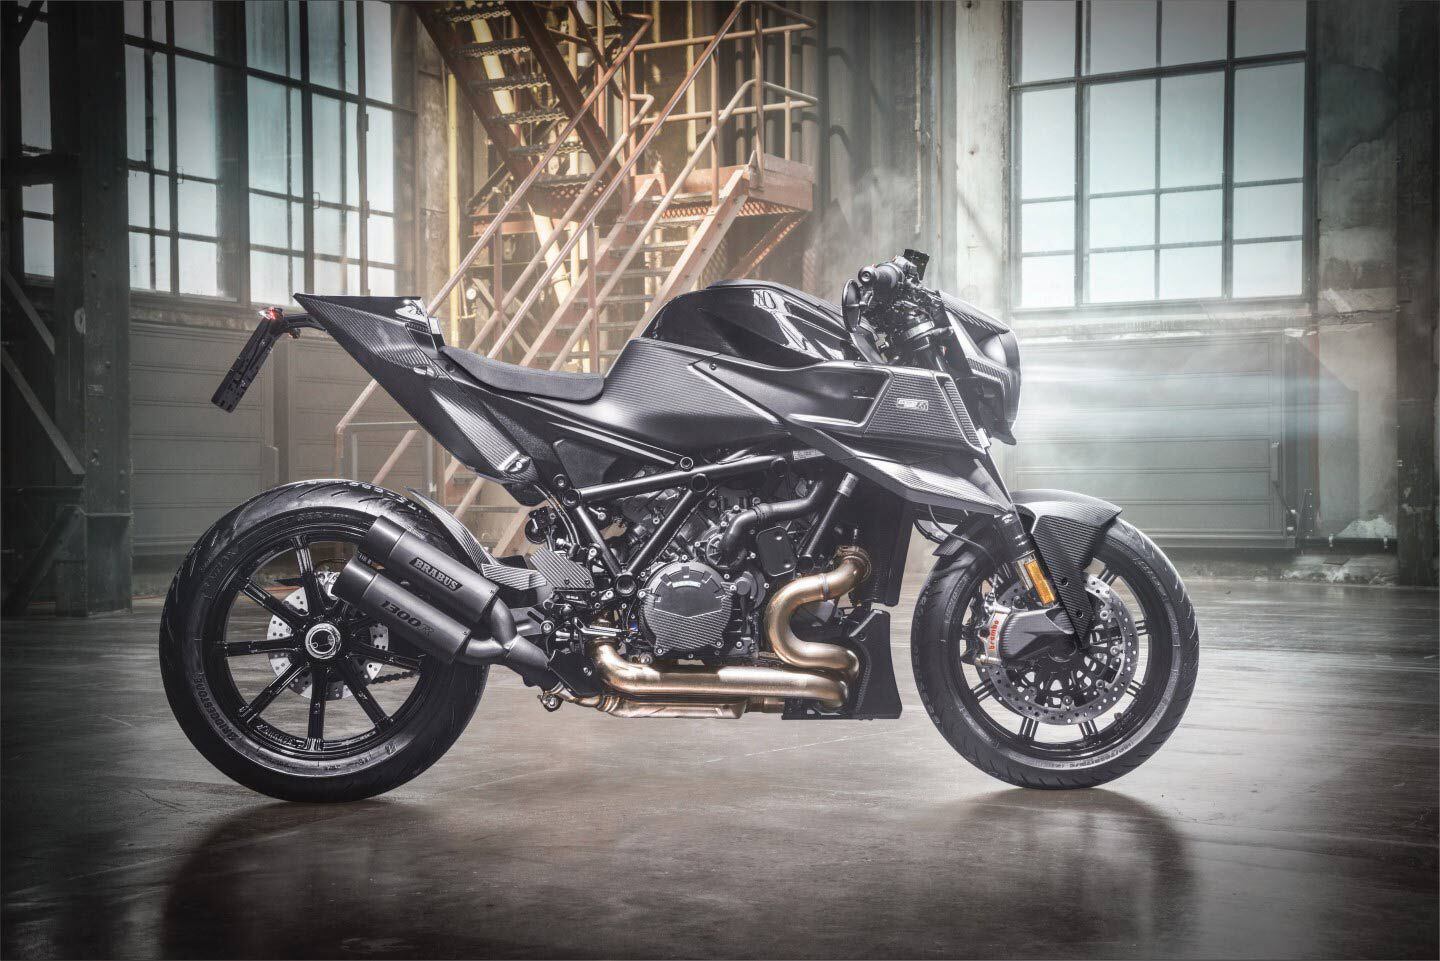 For 2023, Brabus will build 290 examples of its 1300 R, which is based on KTM’s 1290 Super Duke R Evo.